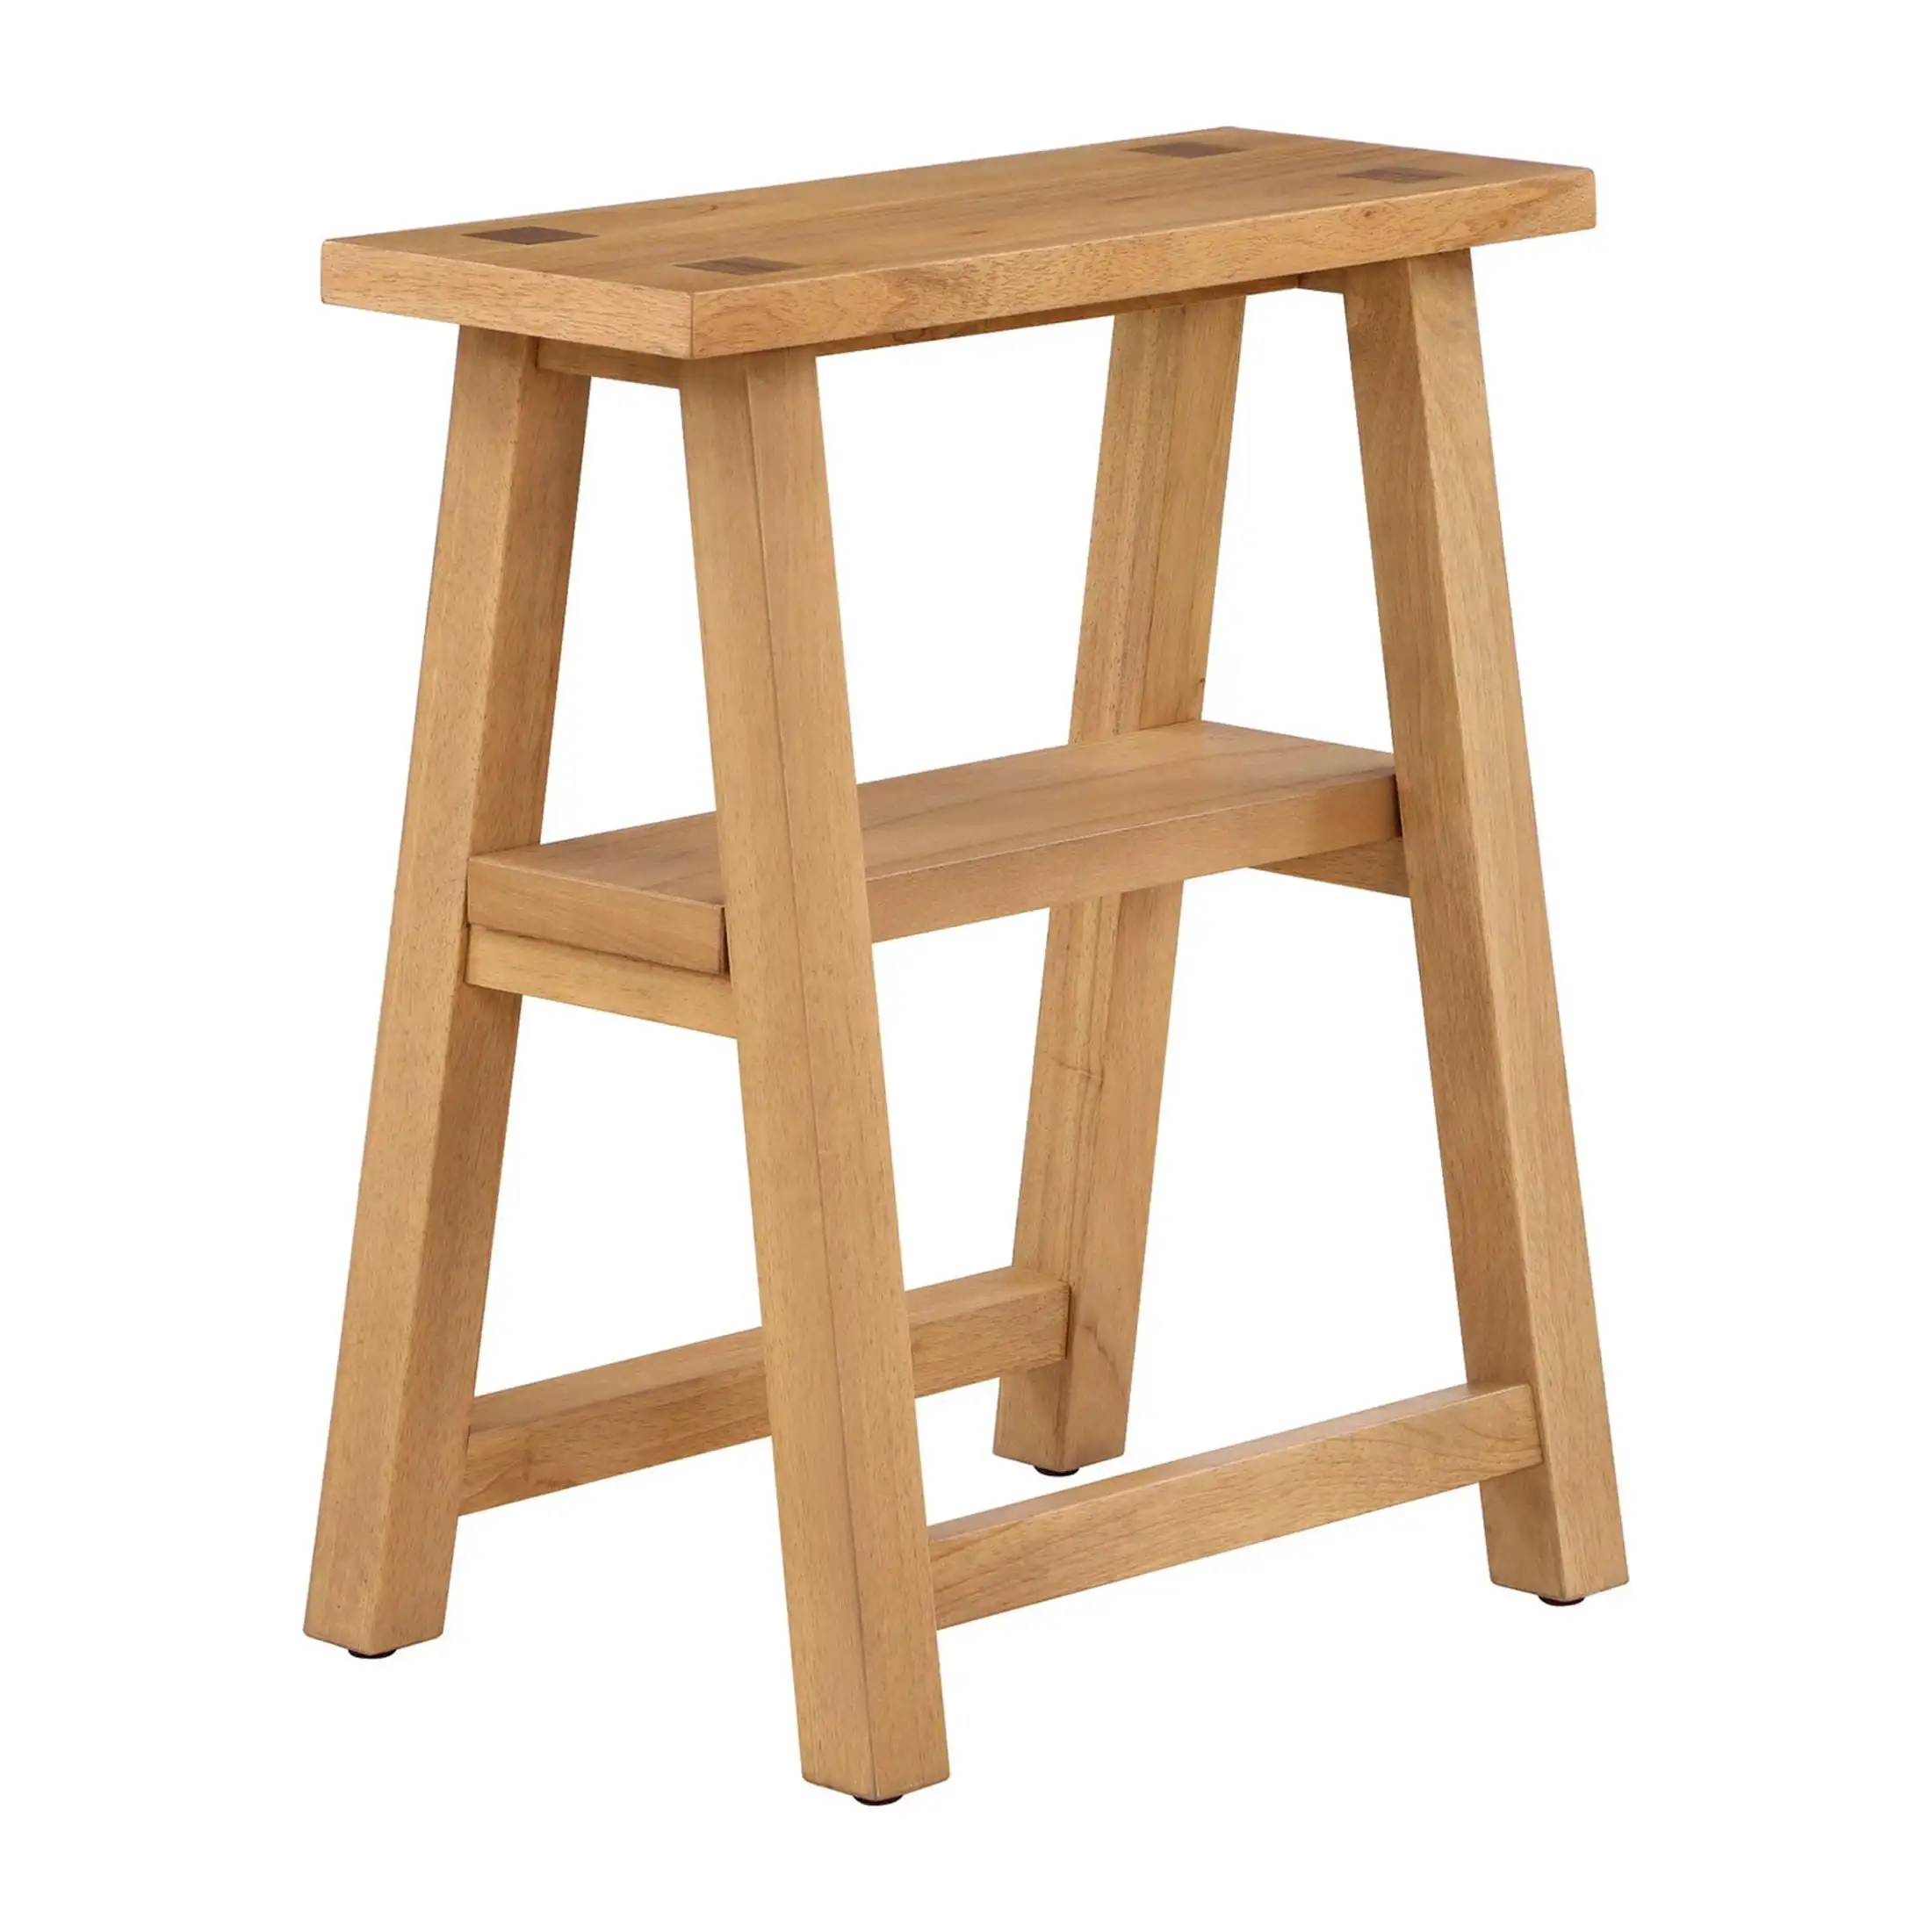 

Better Homes & Gardens Parkridge Solid Wood Narrow Accent Styling Table, Natural Oak finish, by Dave & Jenny Marrs